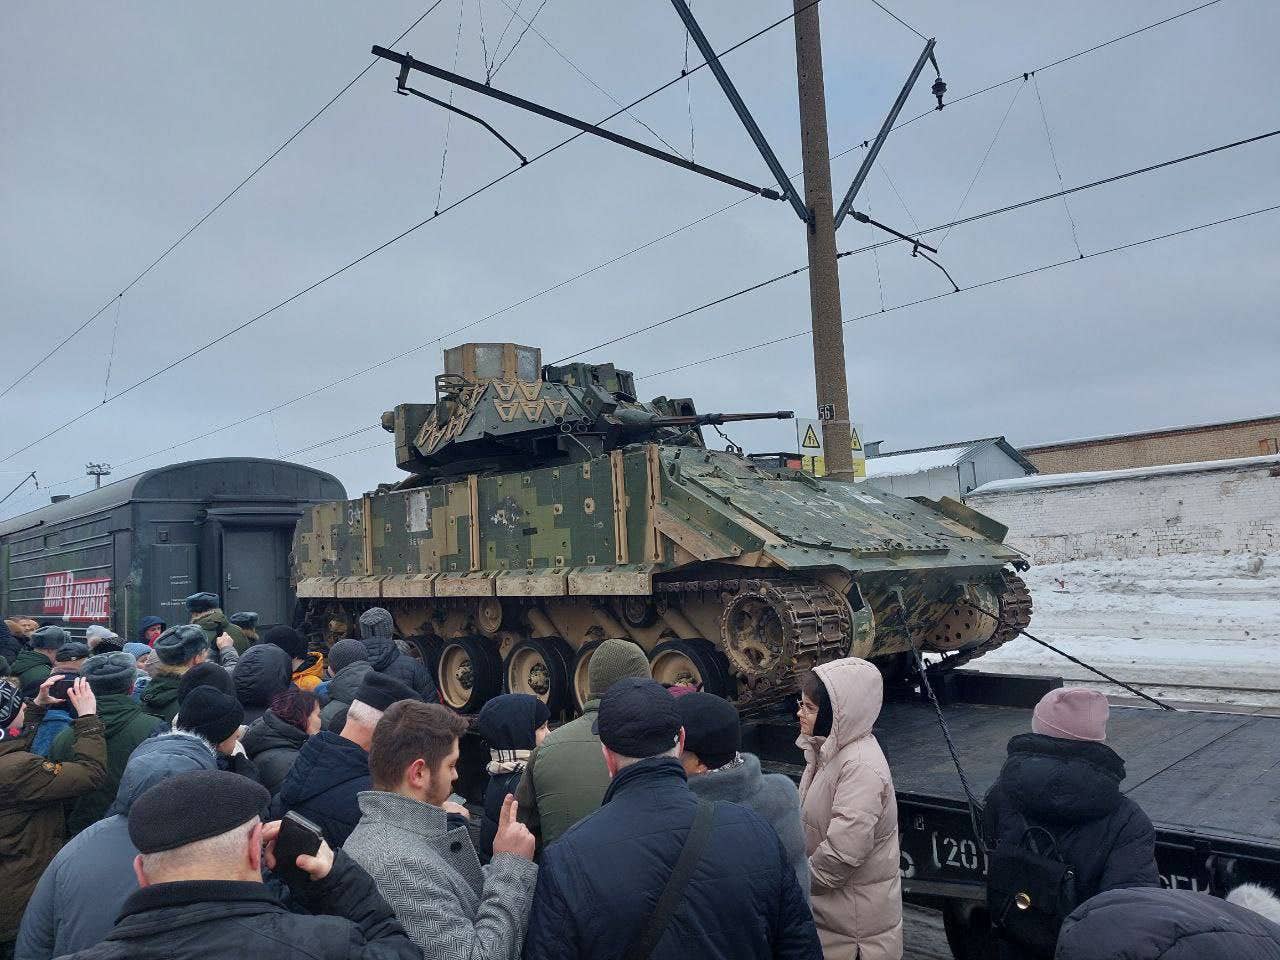 Bradley Fighting Vehicle pictured in Russia today. <em>Unknown author via X/Twitter </em>